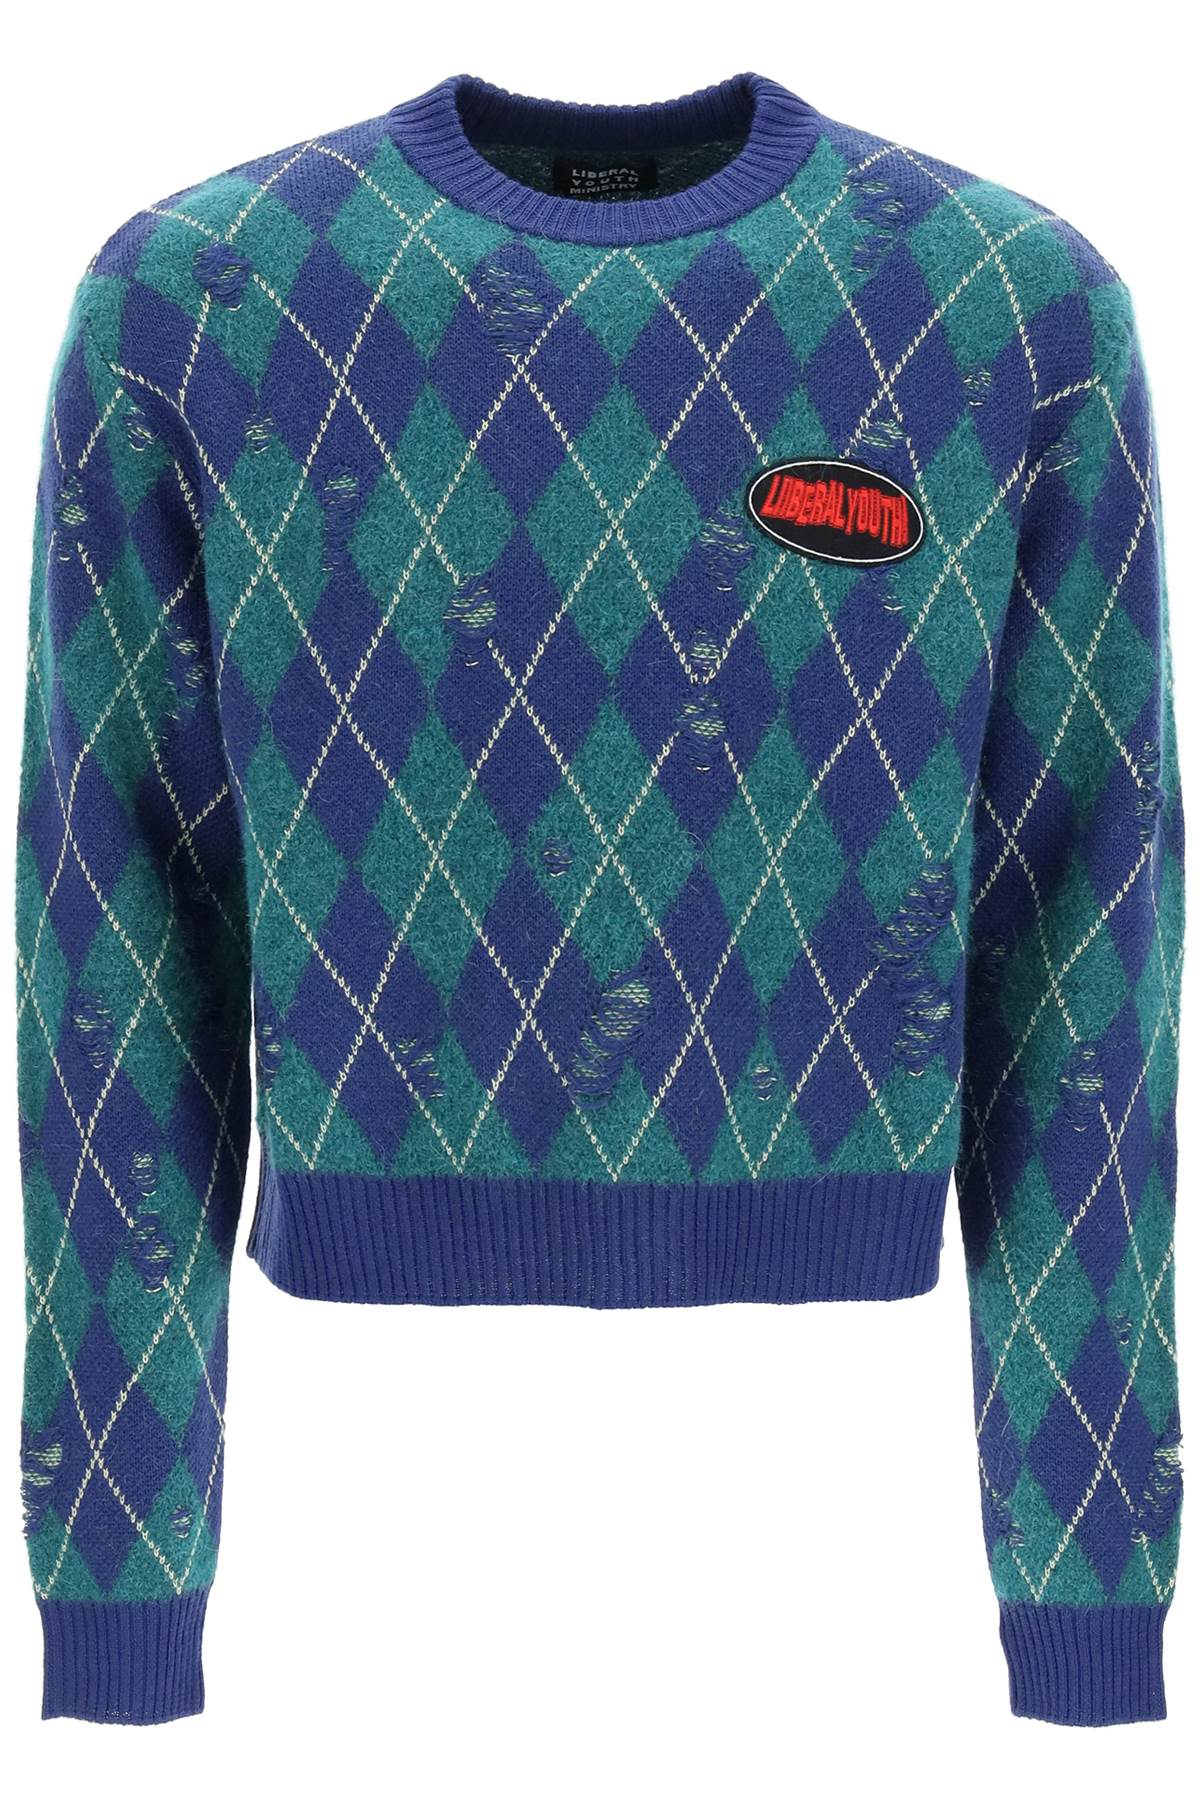 LIBERAL YOUTH MINISTRY DIAMOND-PATTERNED DISTRESSED jumper